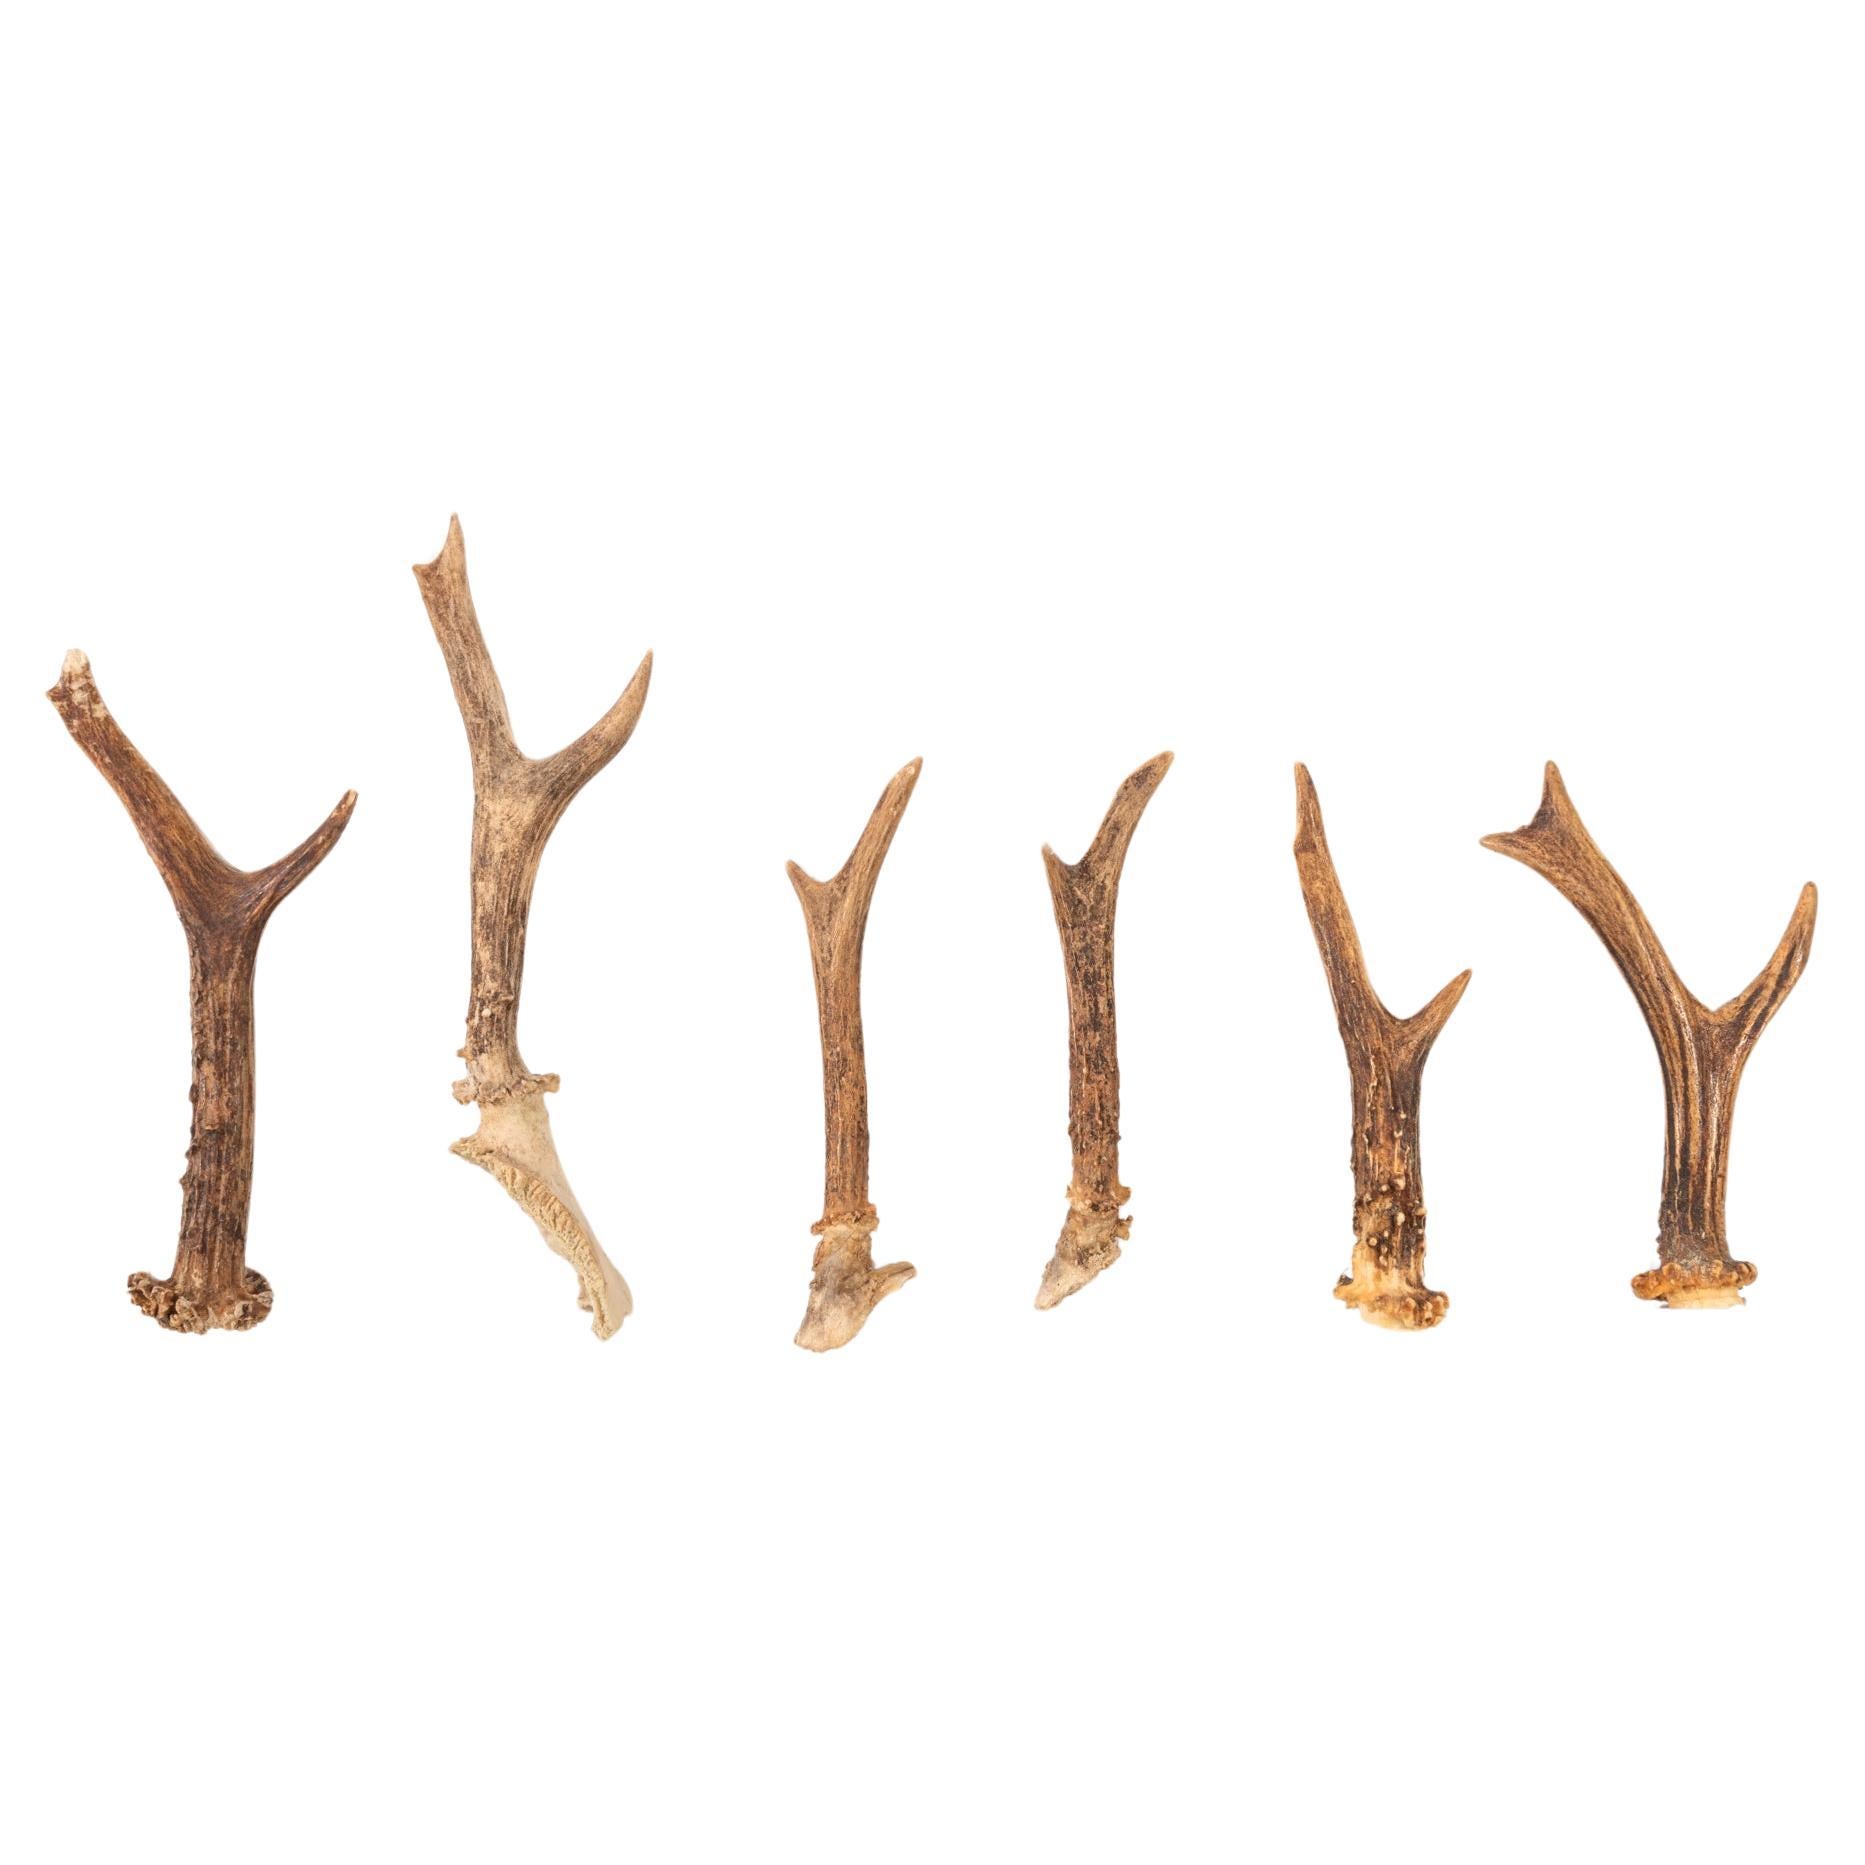 They are the first small antlers of fawns, which are changed as they grow.  I did'nt know what to write and describe in 1stdibs site, but they are natural, suitable as handles on furniture for mountain houses. Very beautiful and natural !
The sizes